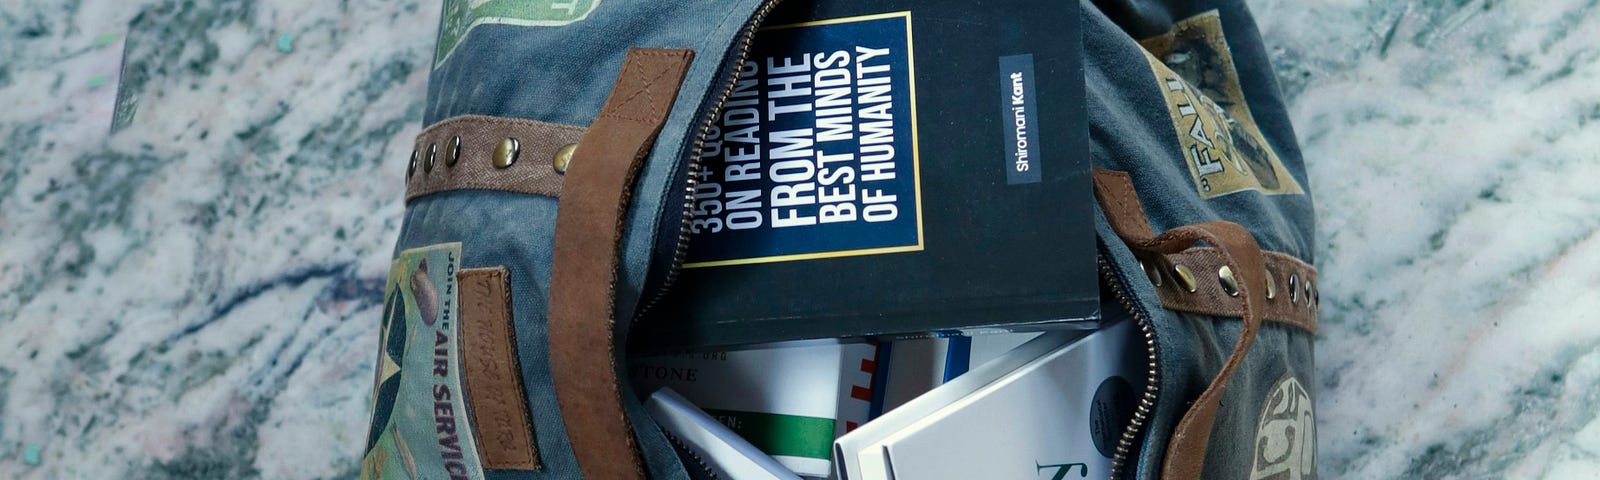 A bag with self help books spilling out of it